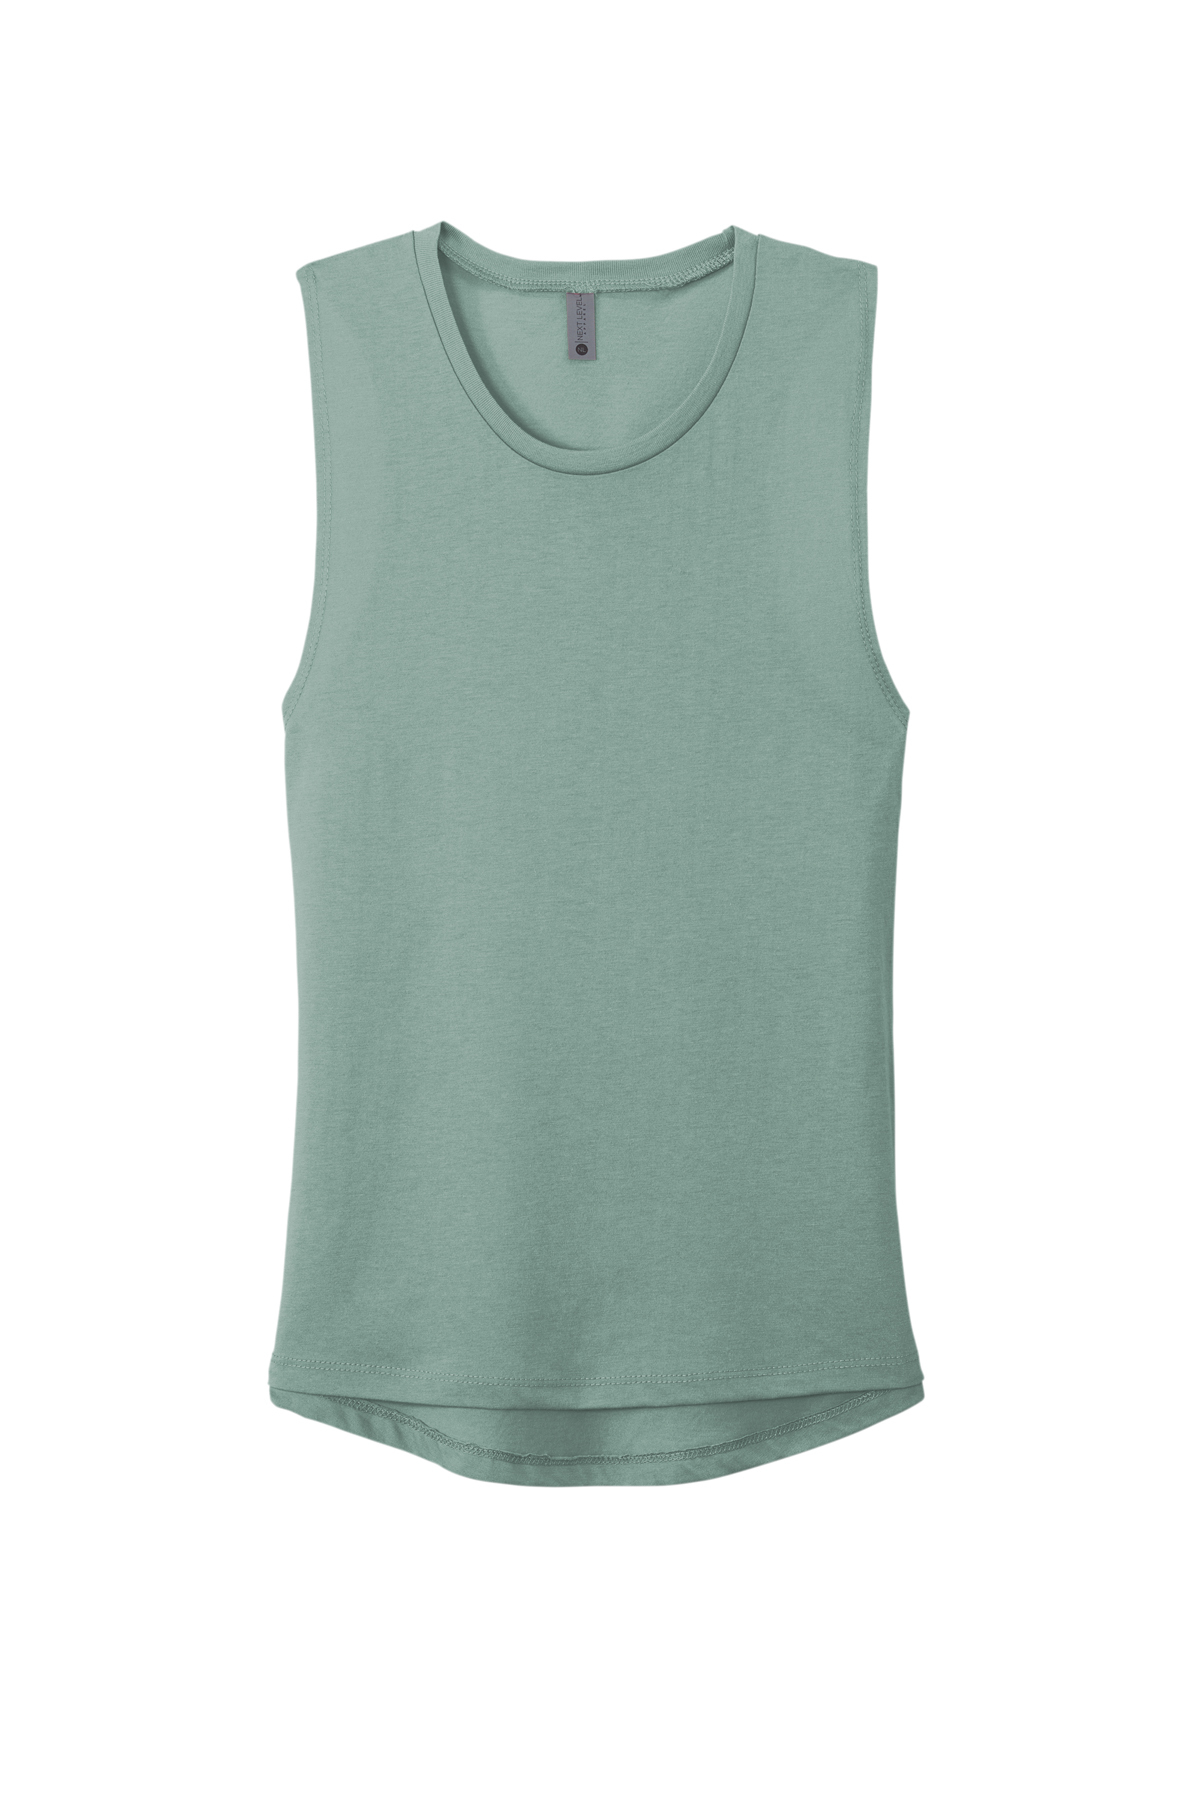 Next Level Apparel Women’s Festival Muscle Tank | Product | Company Casuals